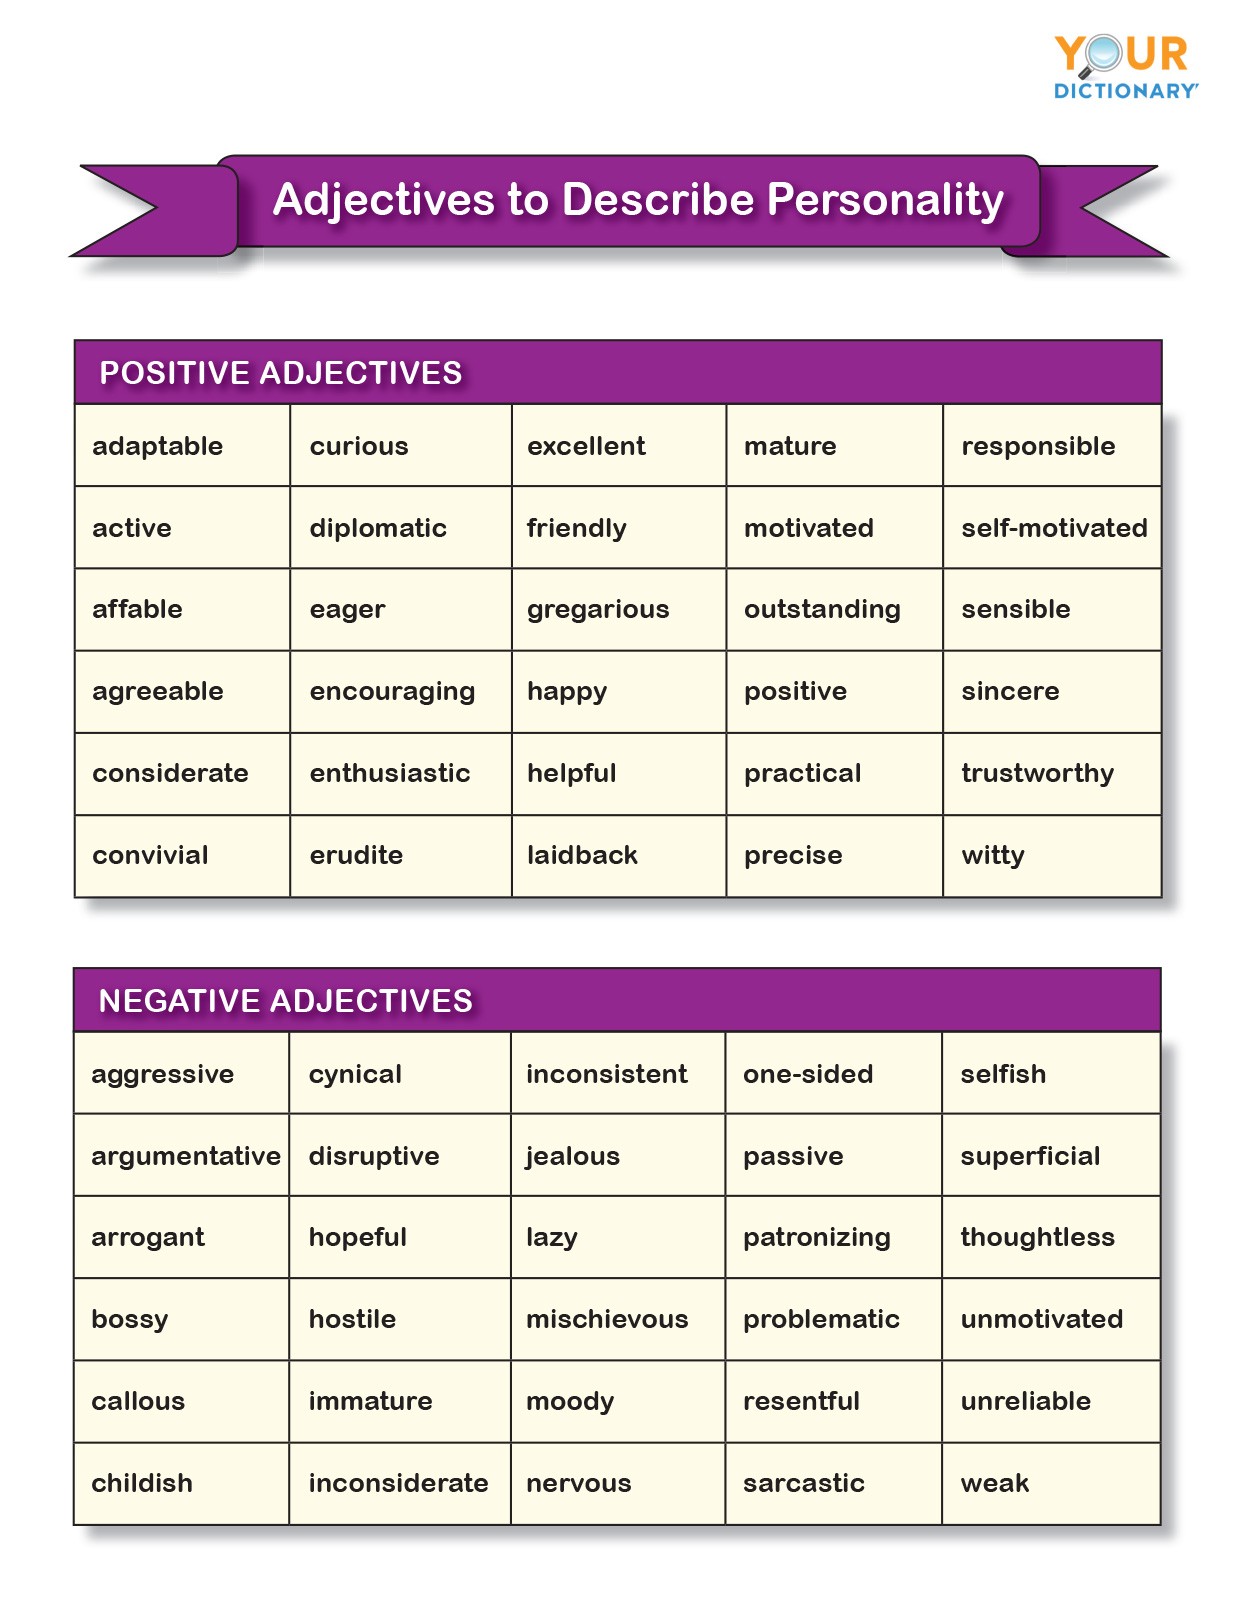 adjectives-to-describe-personality